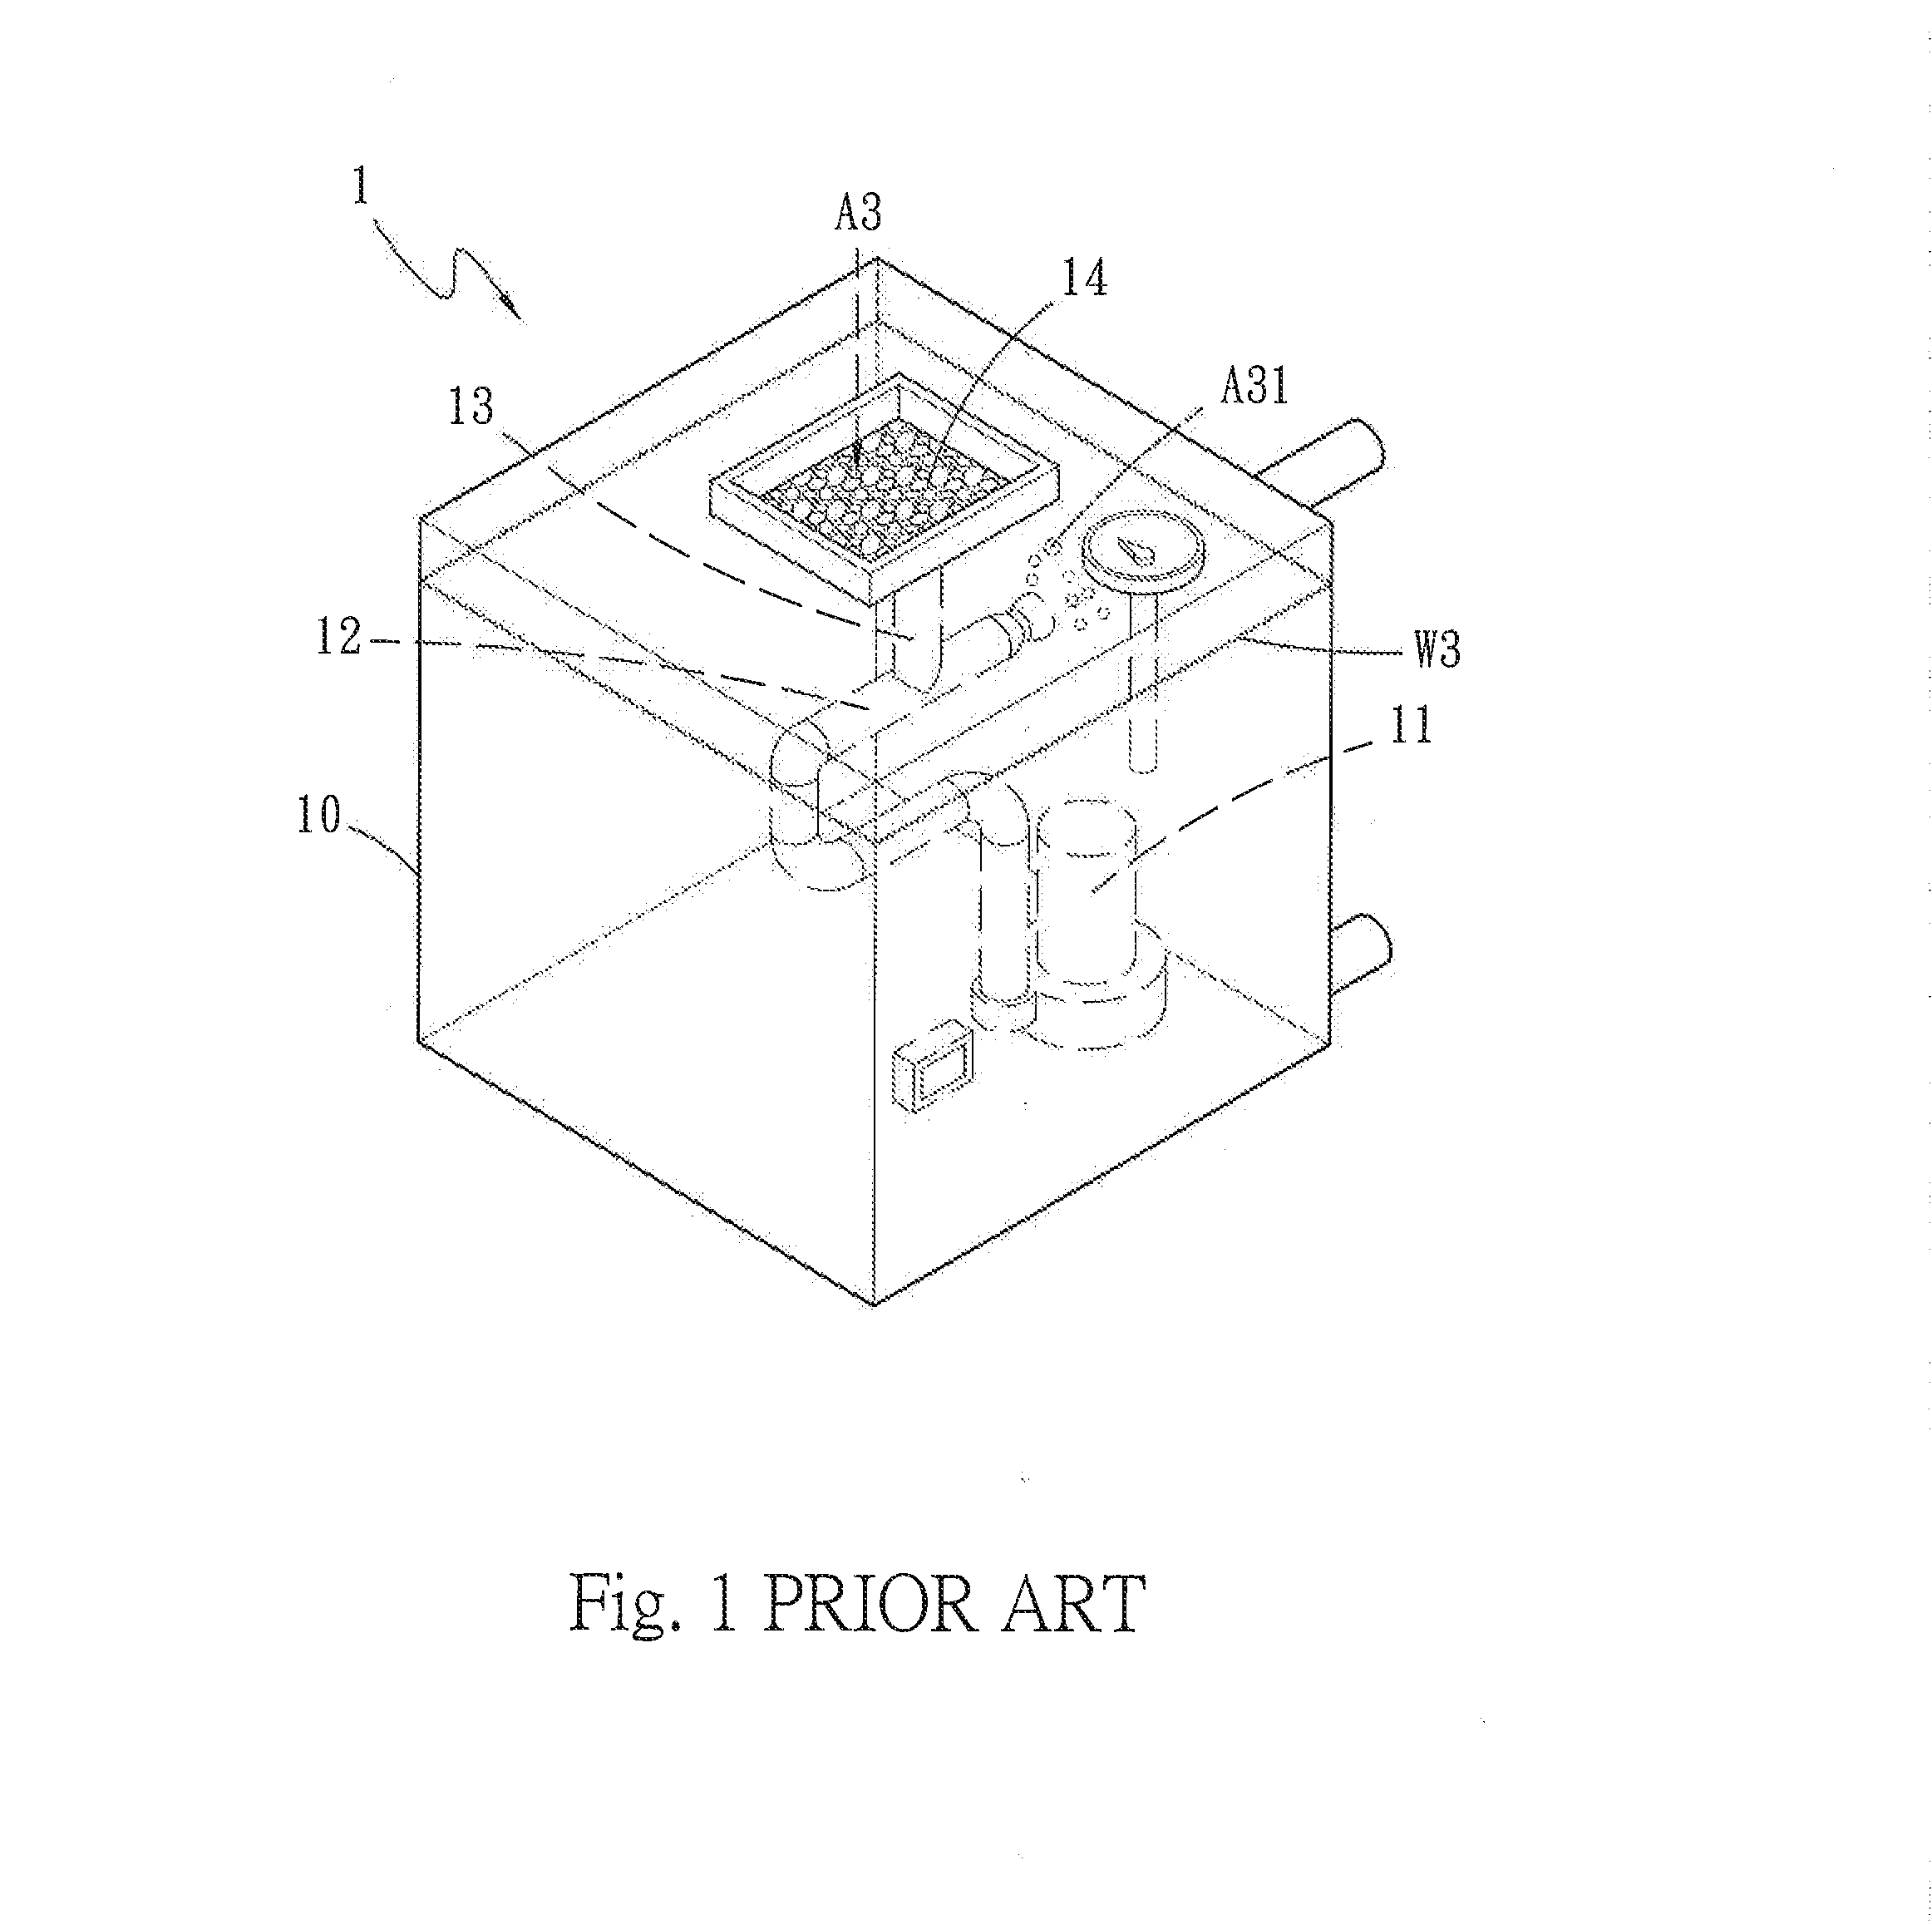 Air cleaning device using water as filter